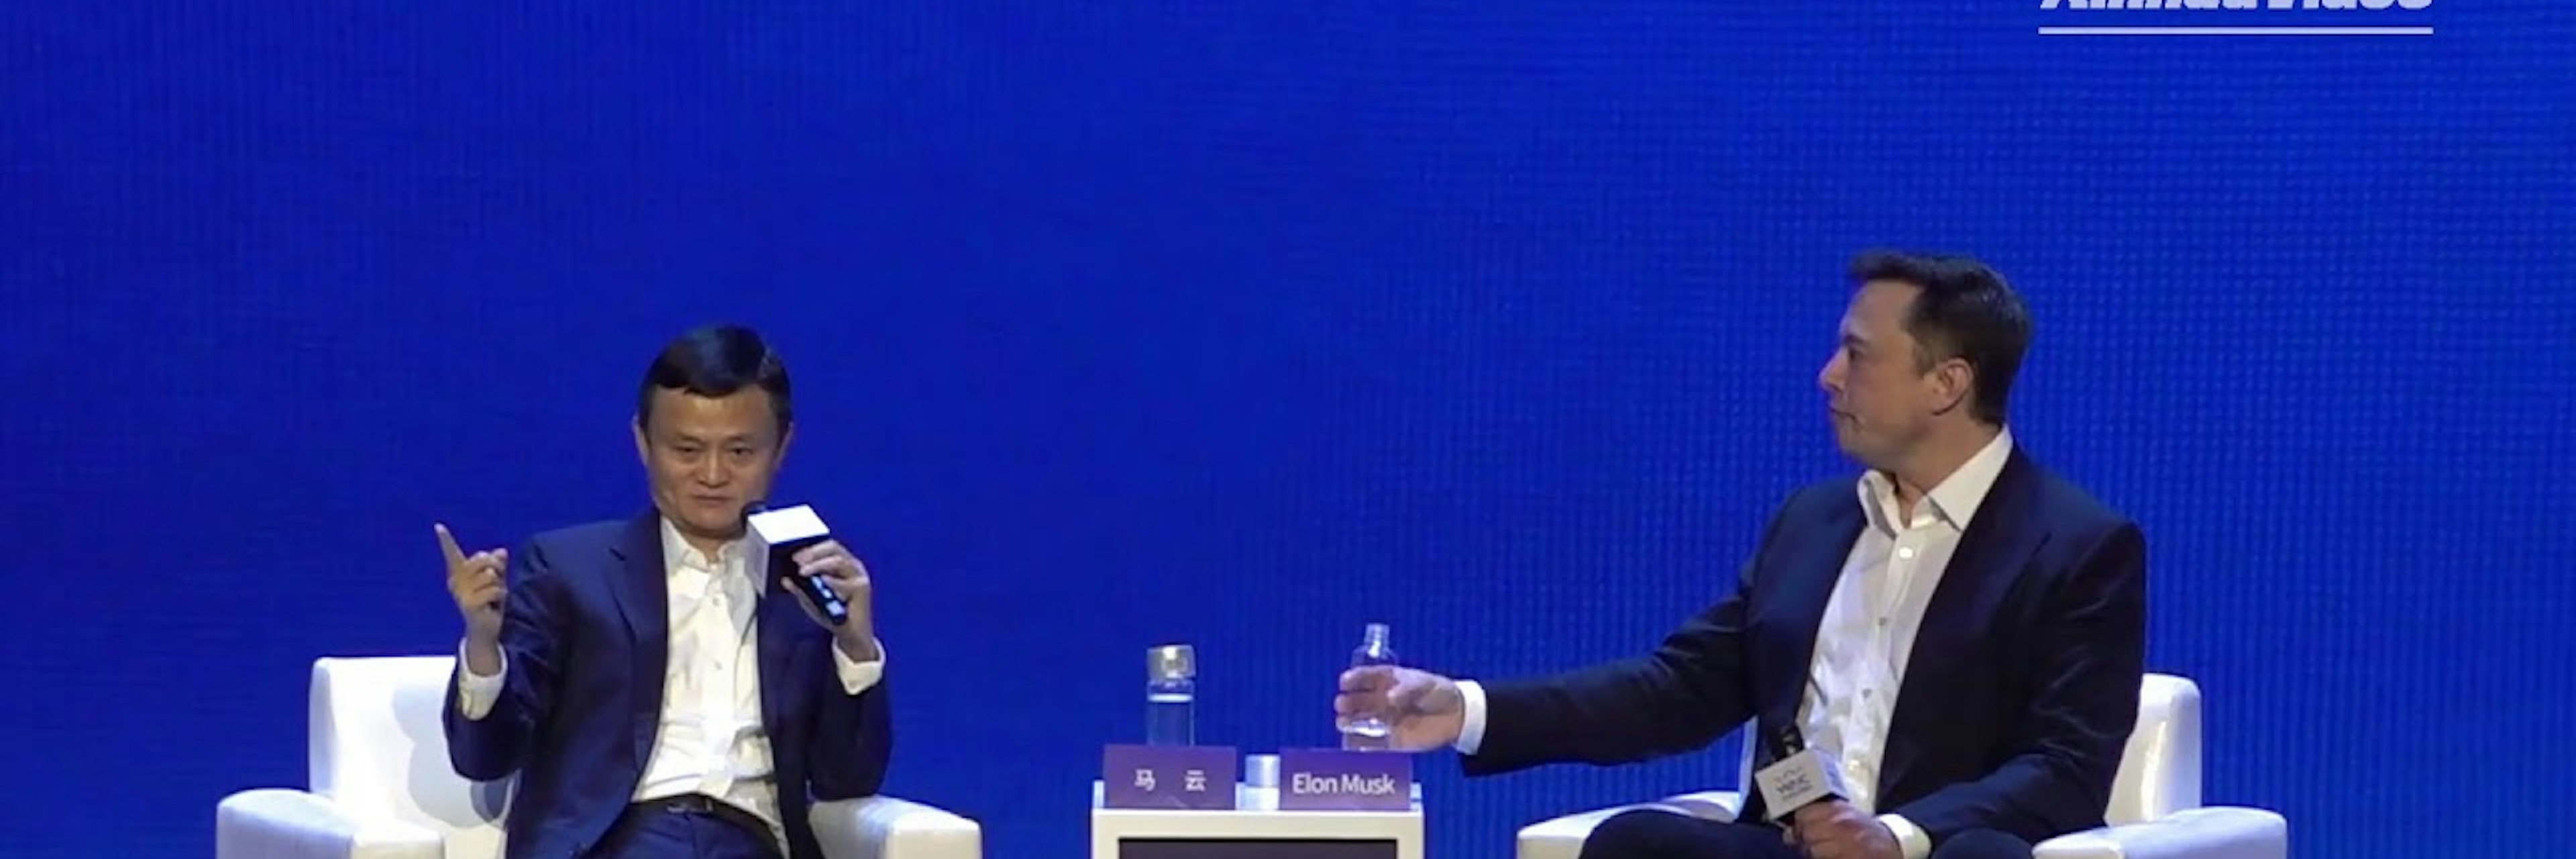 Jack Ma on stage with Elon Musk